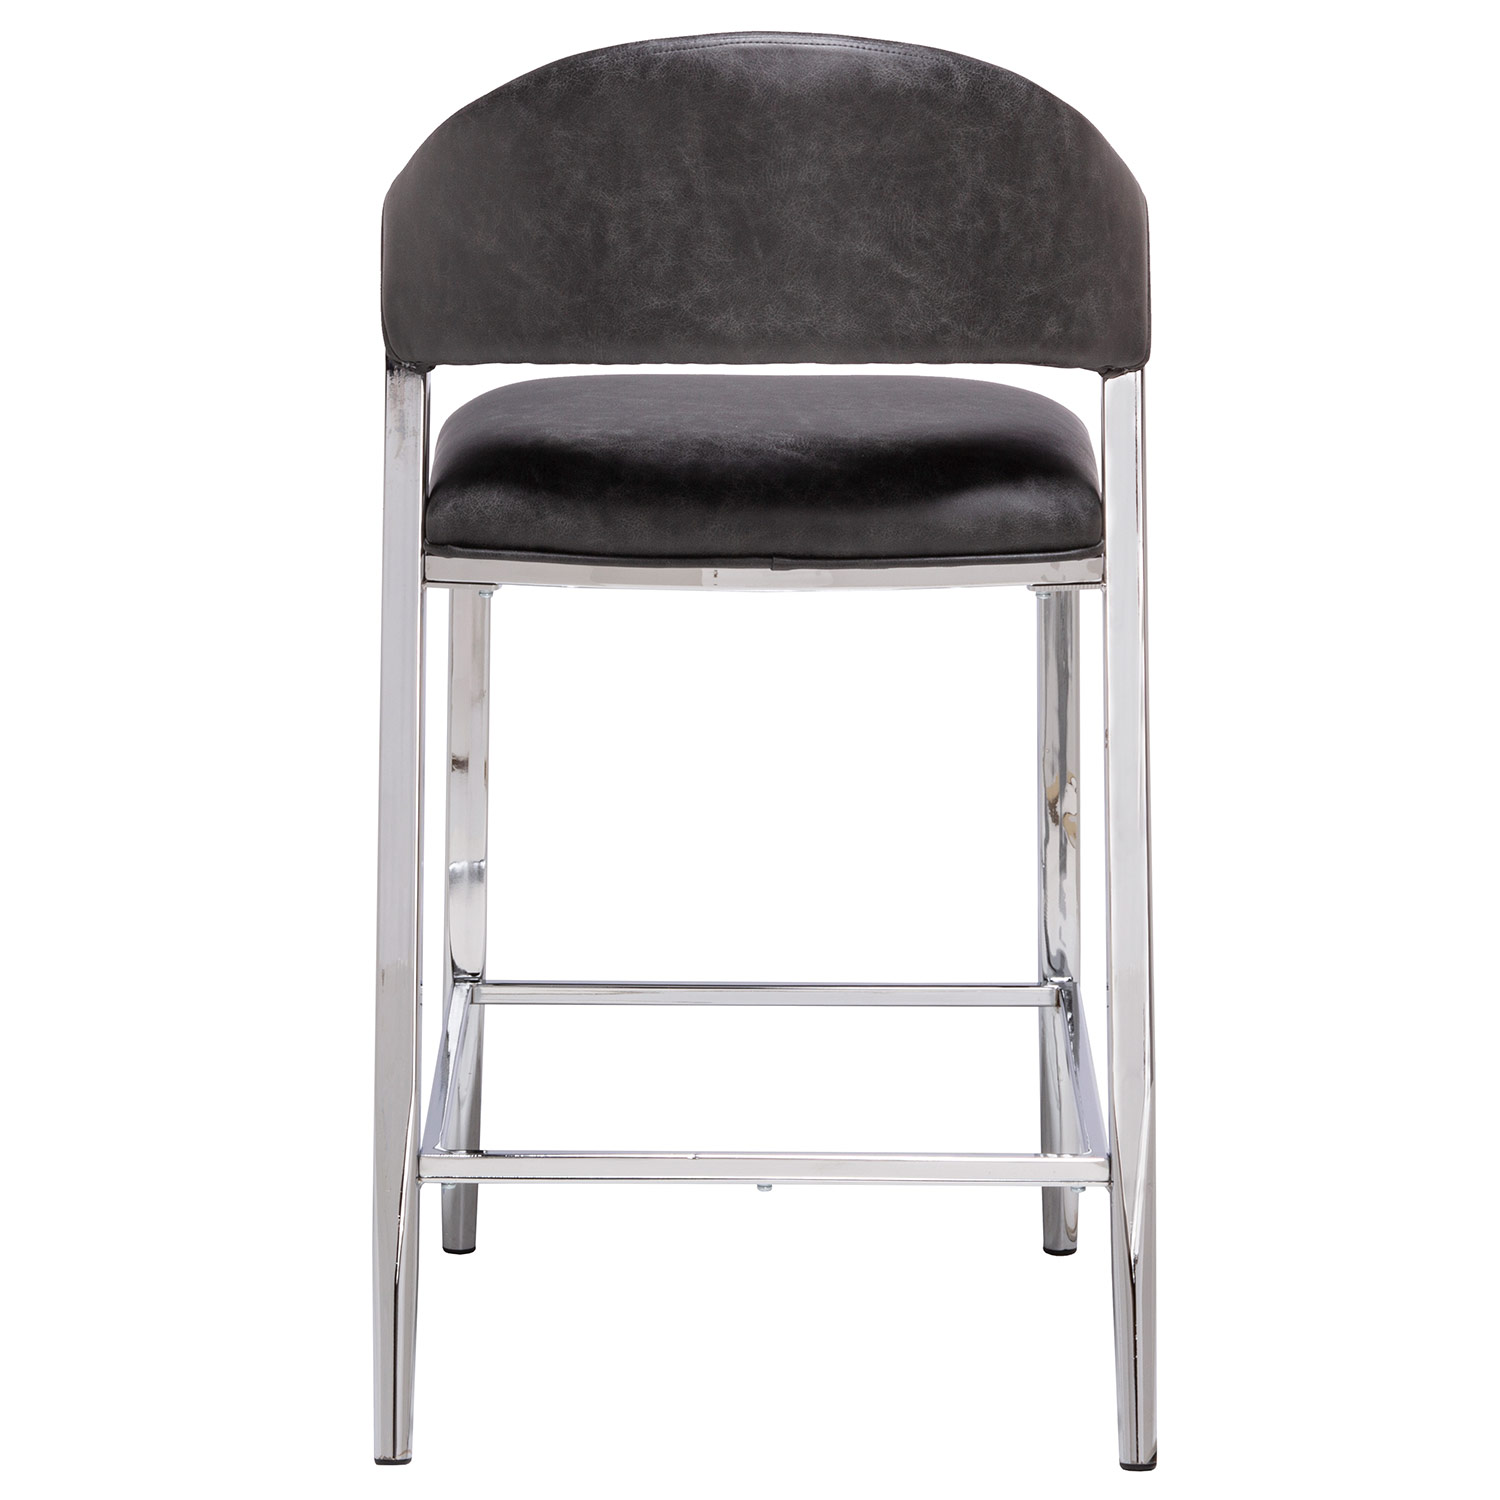 Hillsdale Molina Counter Height Stool - Chrome